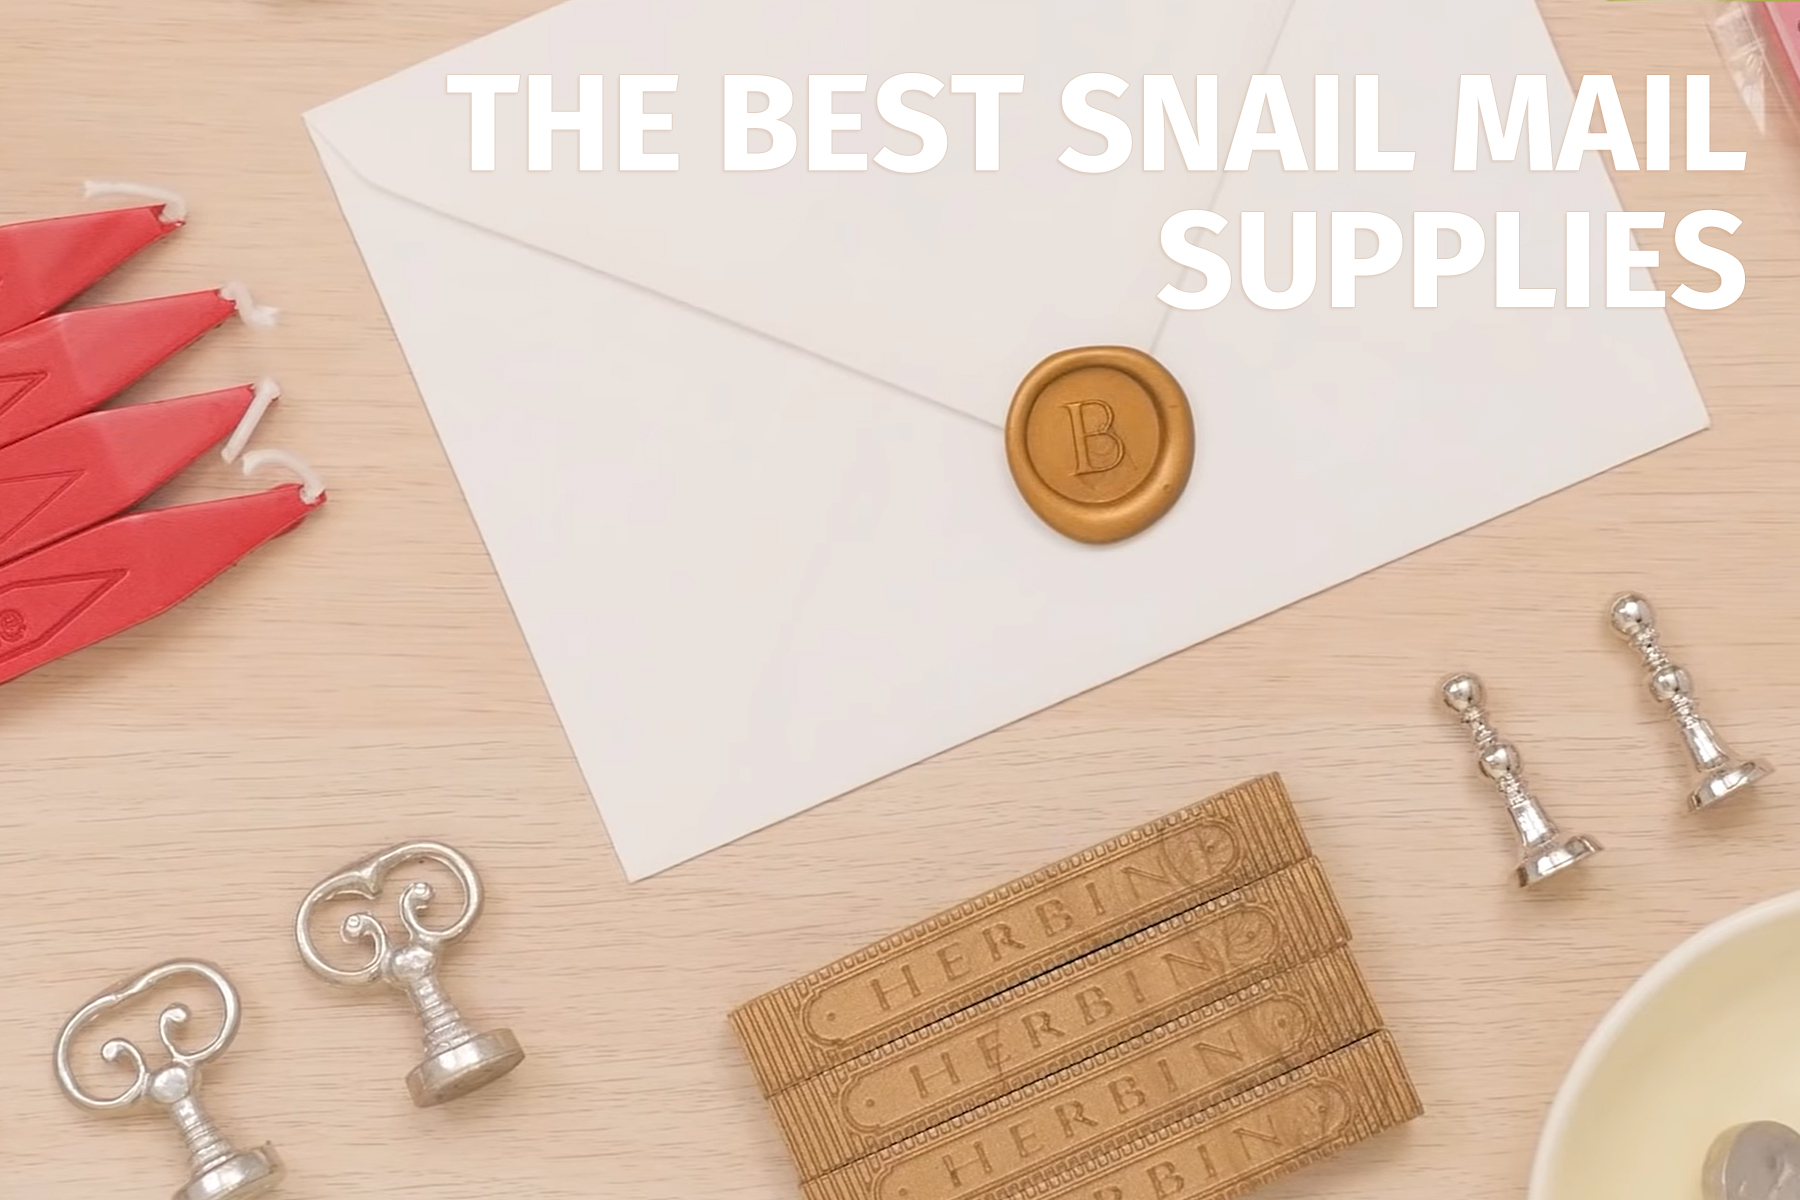 Best letter writing set for adults: Add to your stationery collection